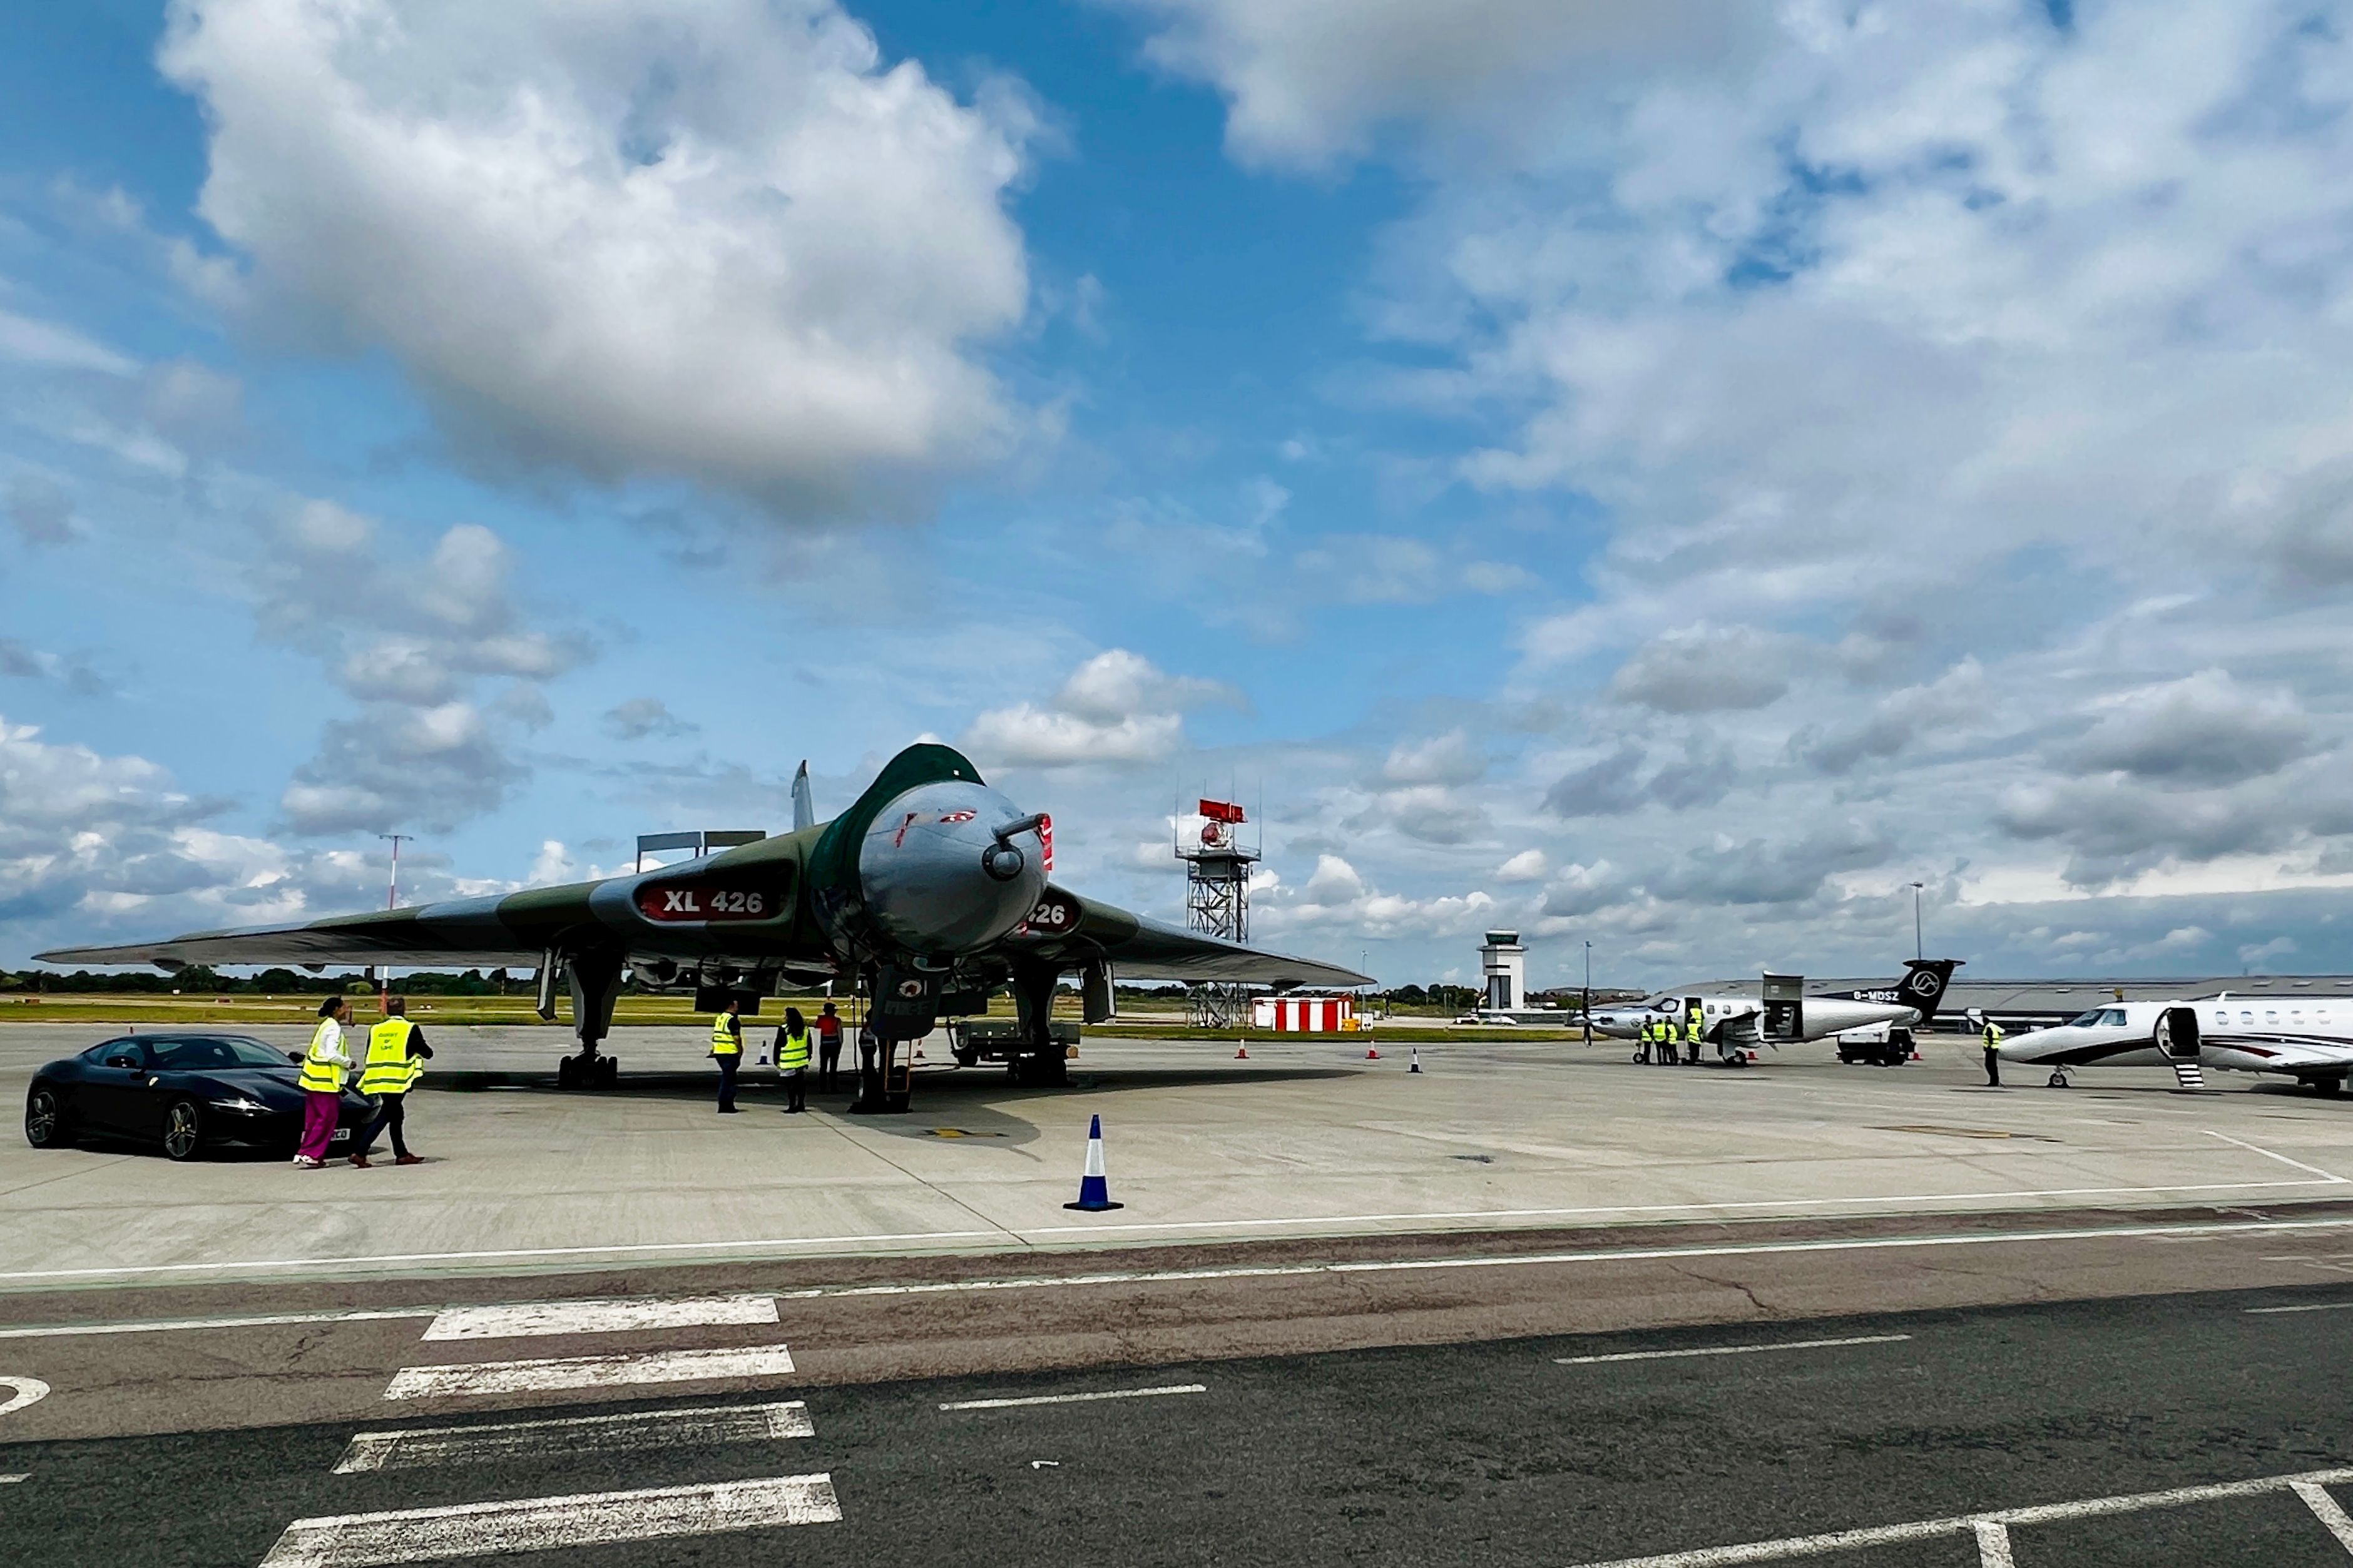 An Avro Vulcan on display at London Southend Airport.